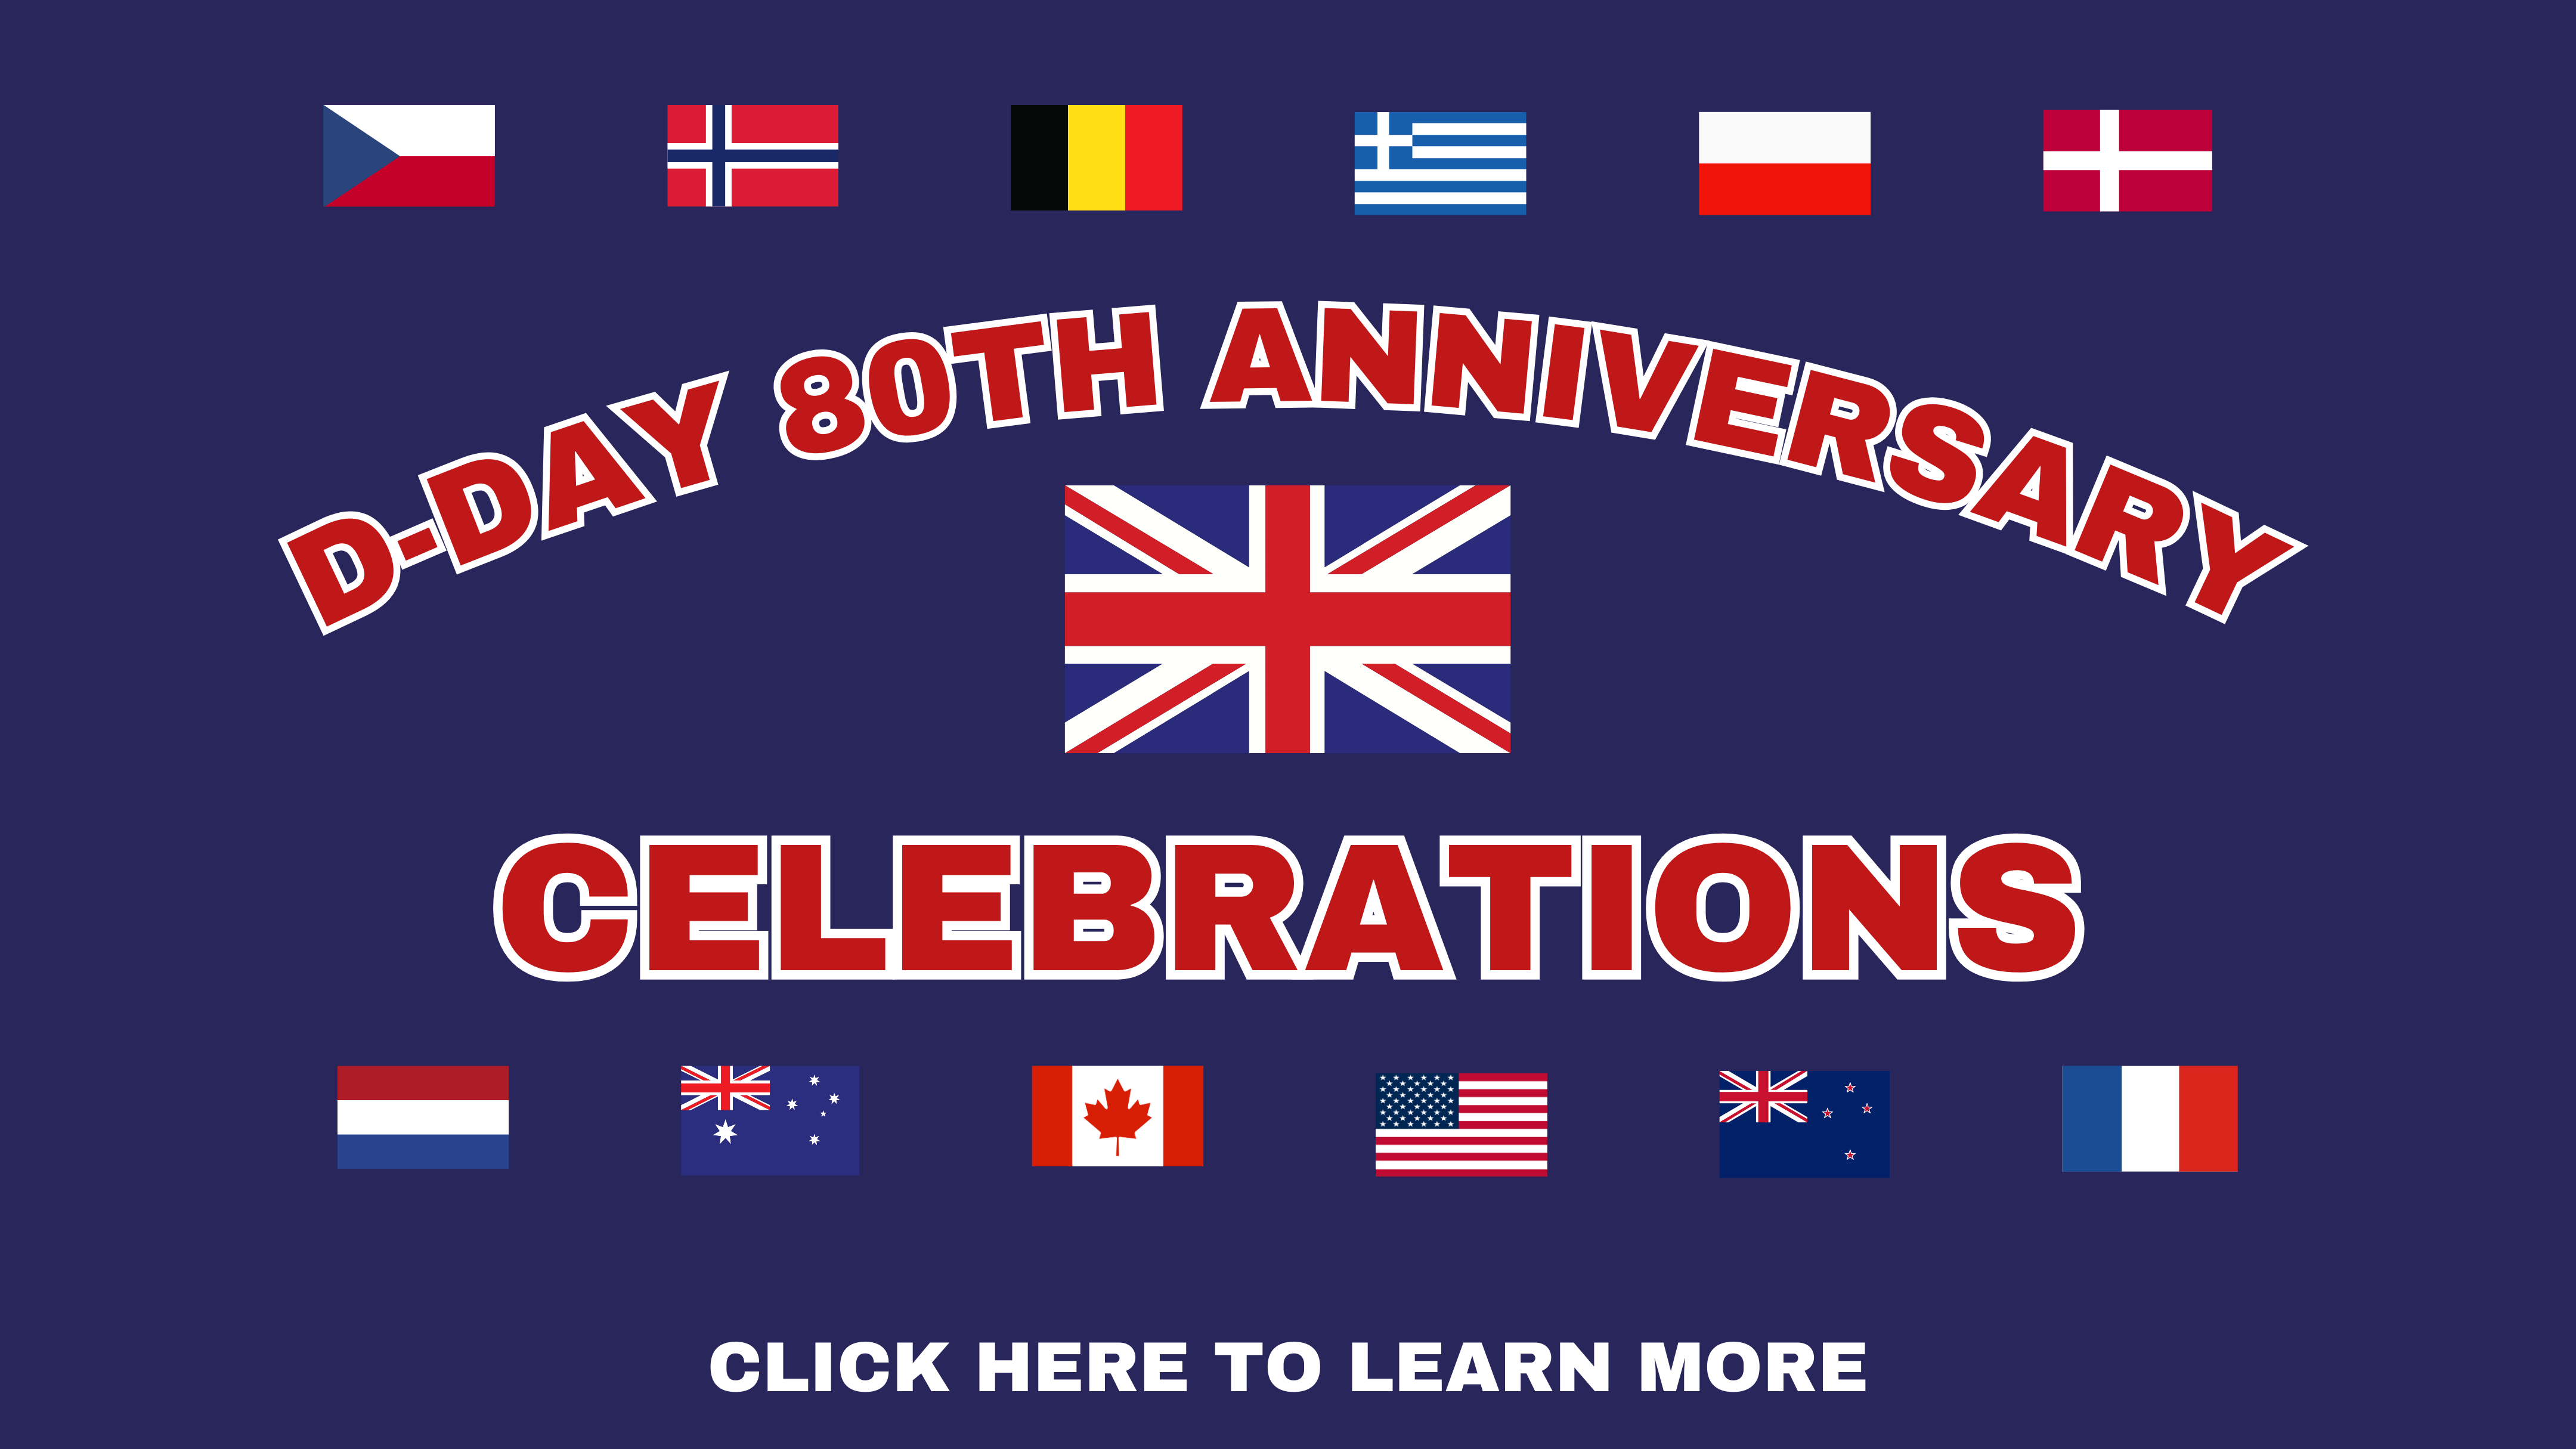 D-Day 80th Anniversary Celebrations. Click here to learn more